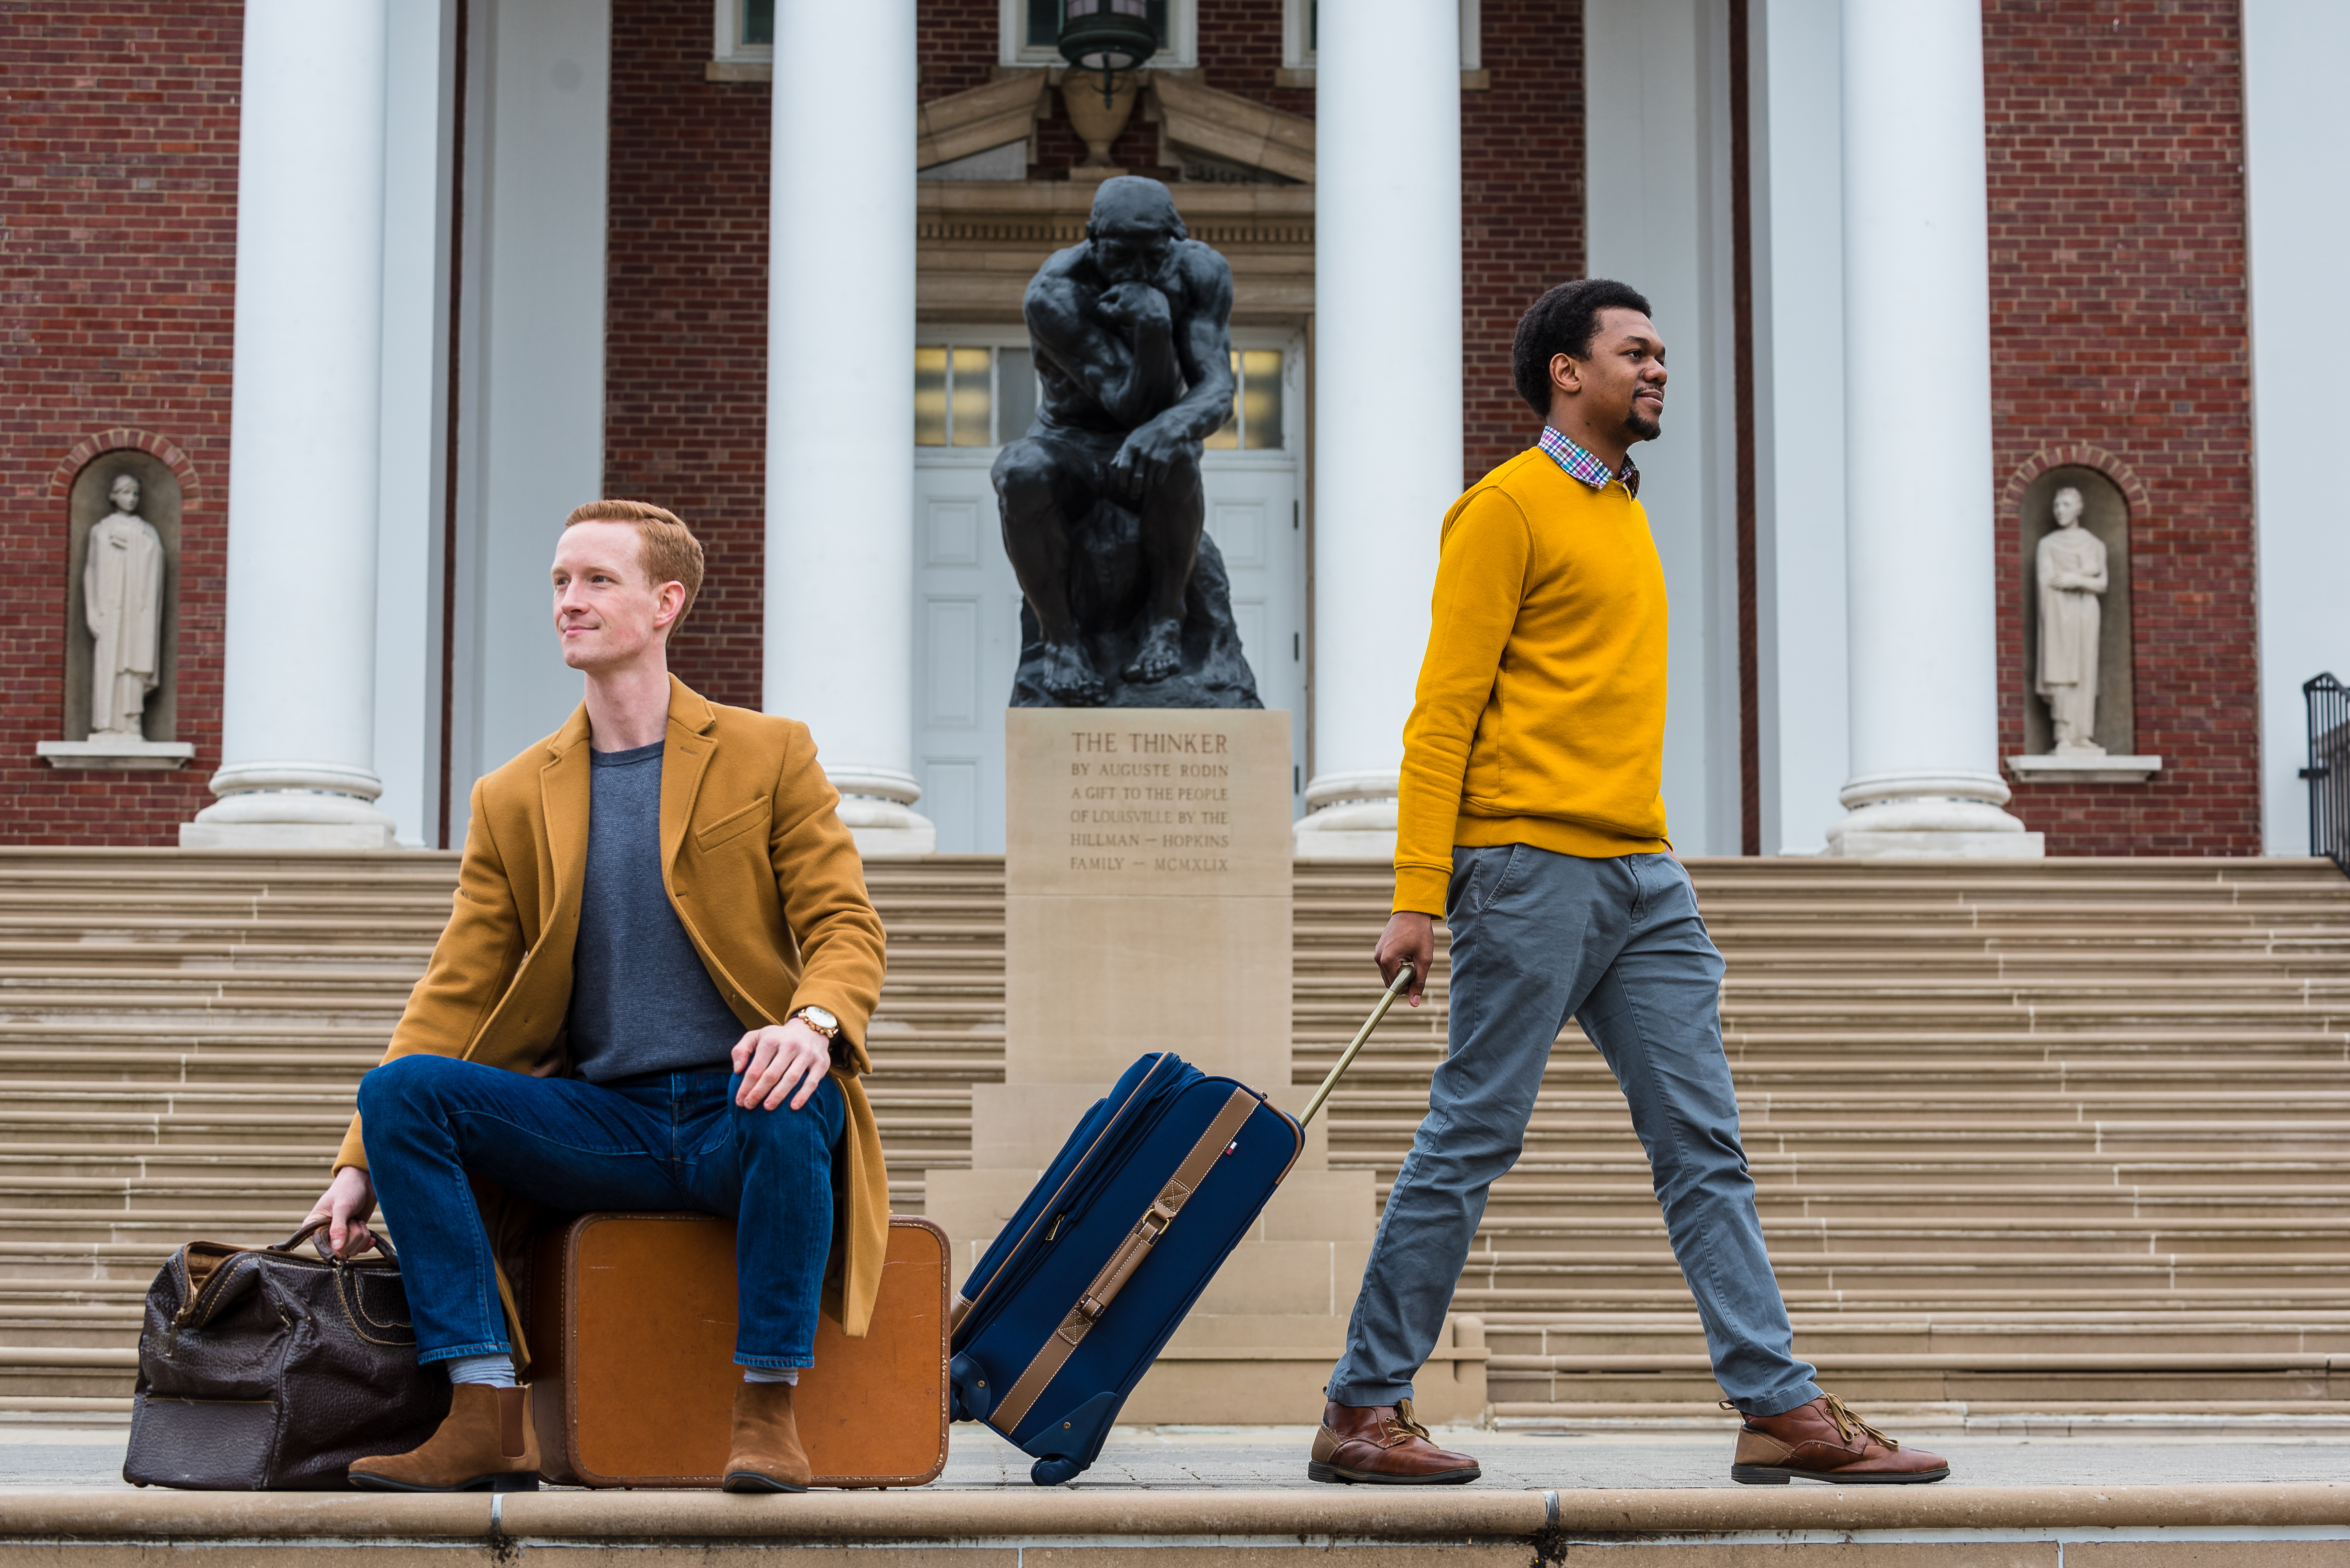 Chris Bird and Kavonte Jones with luggage in front of the Thinker statue on UofL's campus